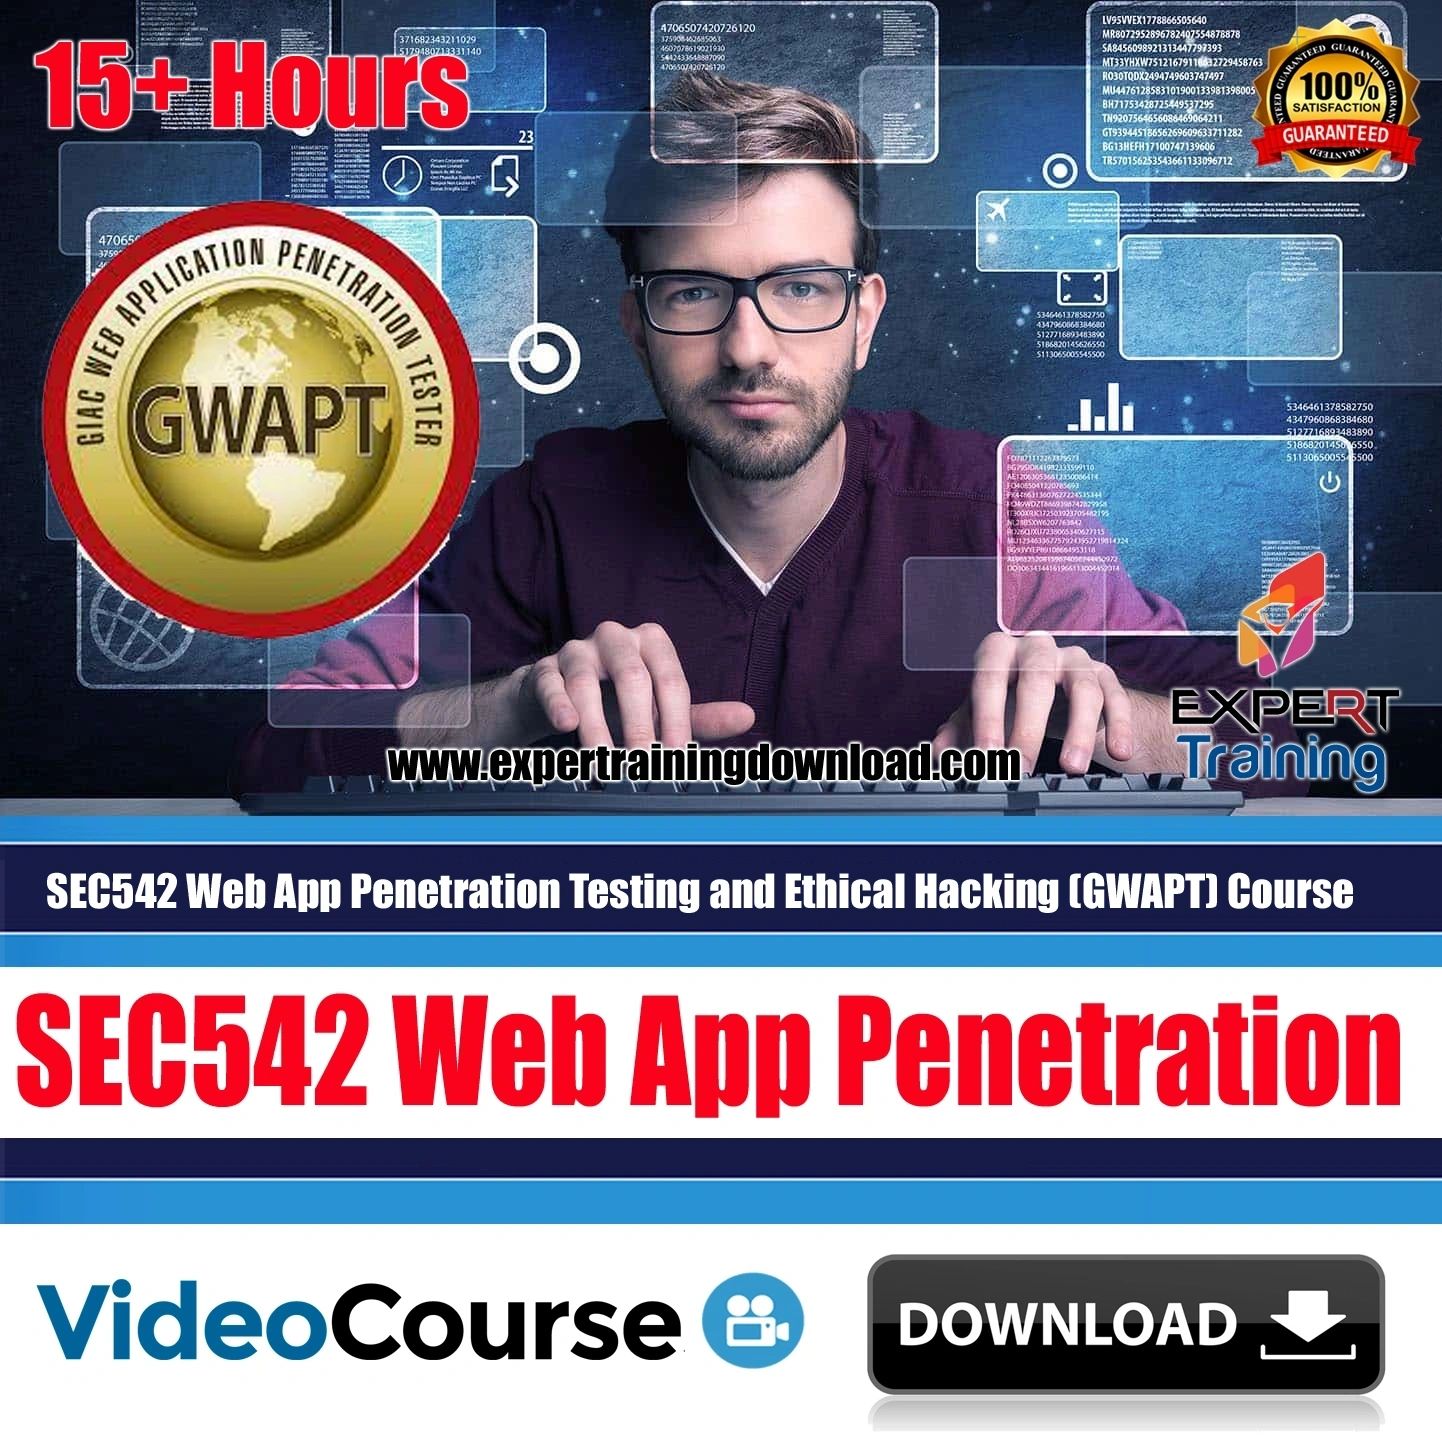 SEC542 Web App Penetration Testing and Ethical Hacking (GWAPT)